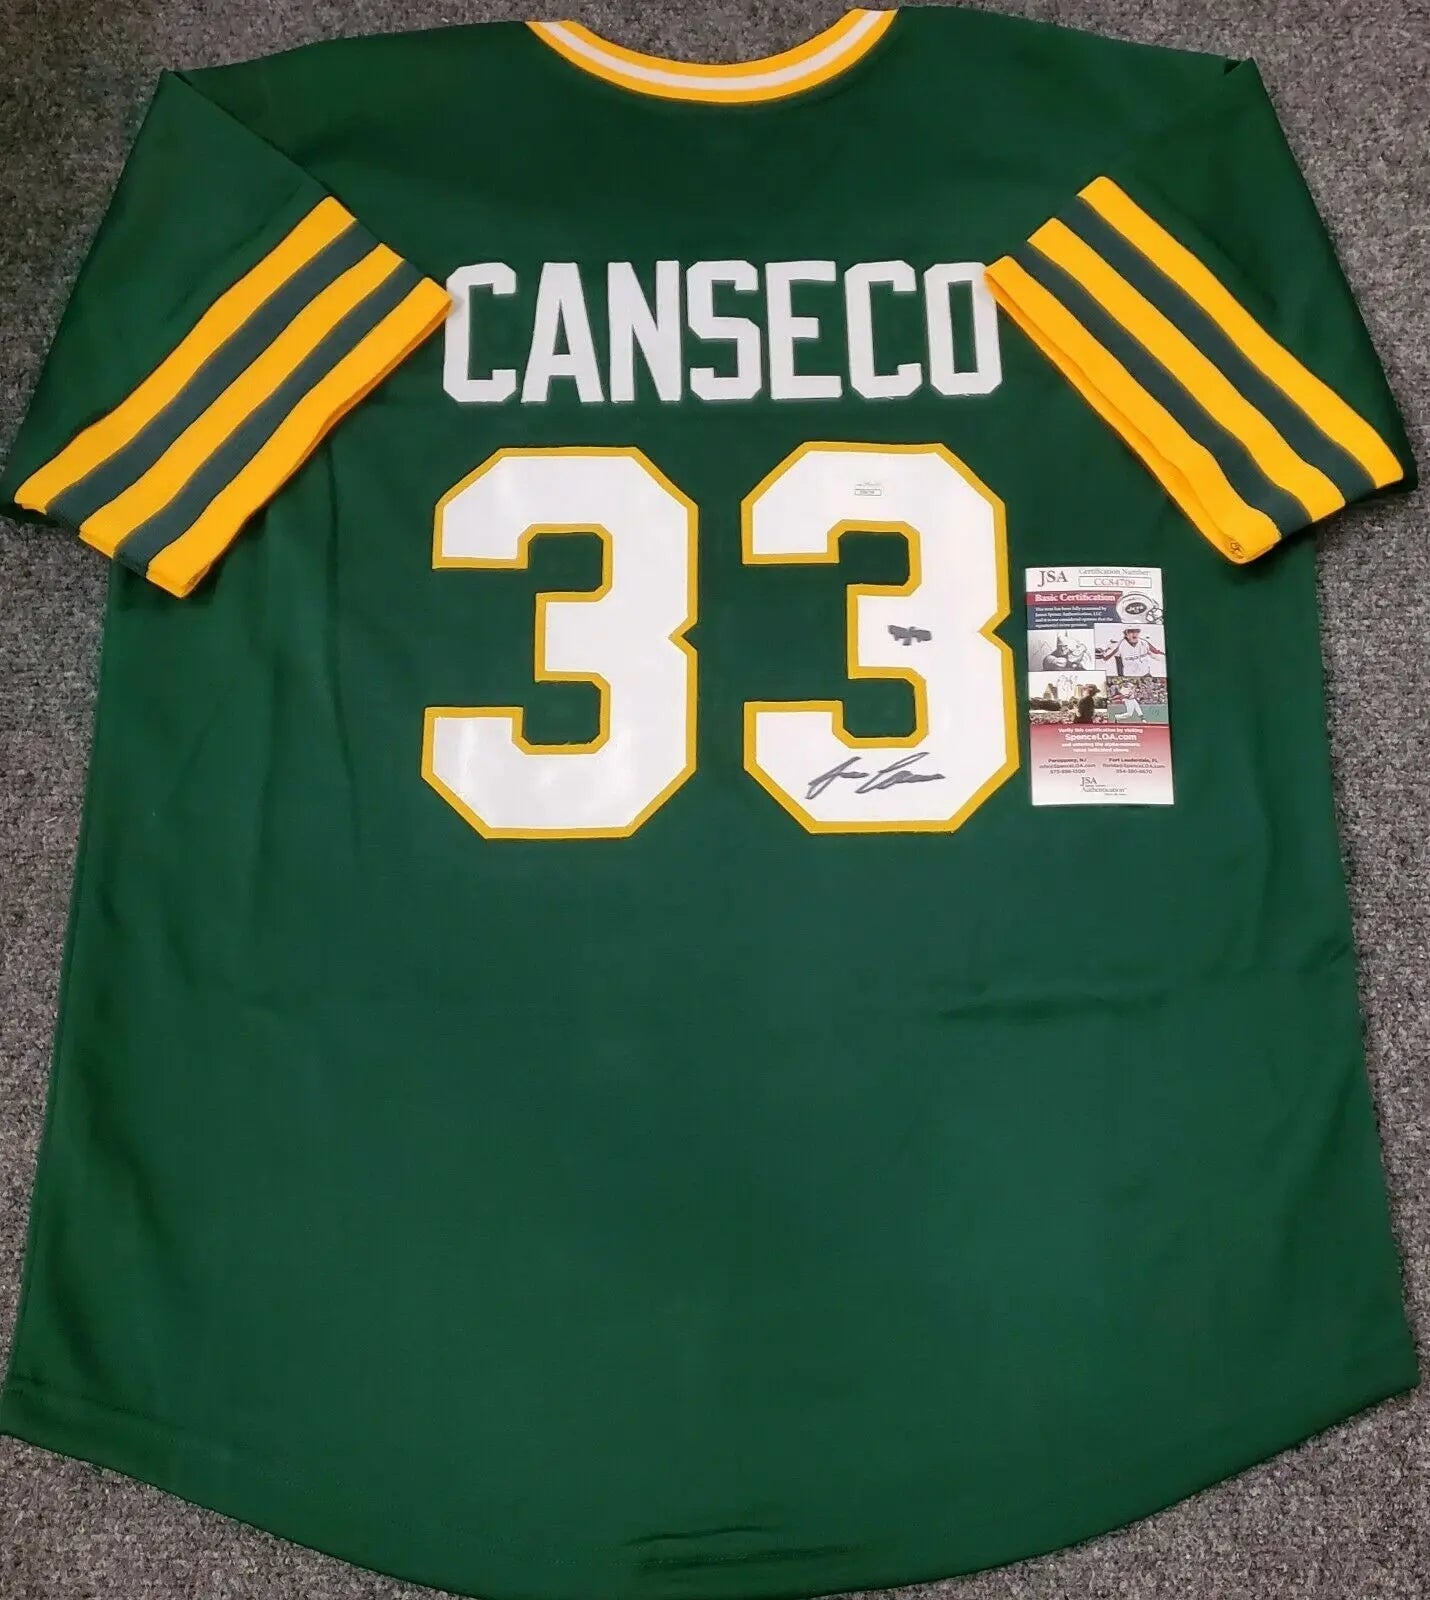 MVP Authentics Oakland A's  Jose Canseco Autographed Inscribed "40/40" Jersey Jsa Coa 134.10 sports jersey framing , jersey framing